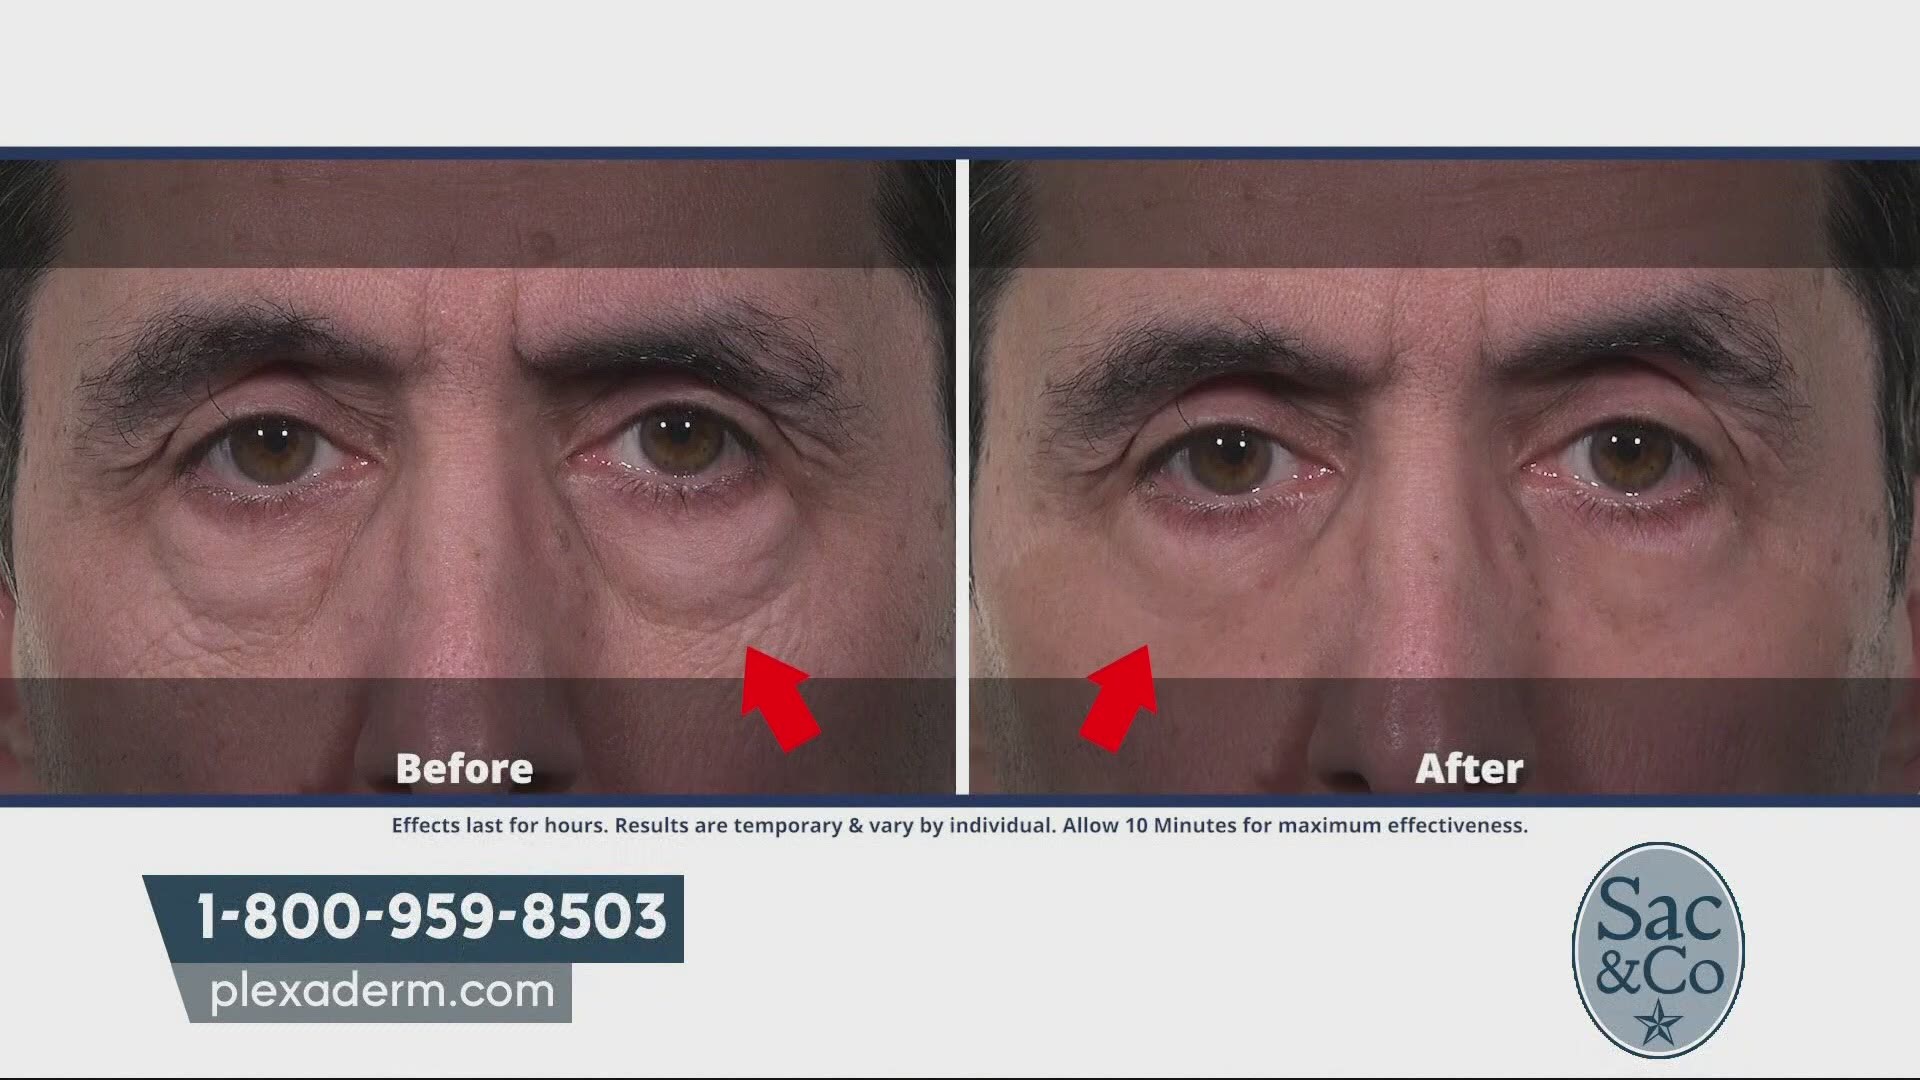 Learn how Plexaderm may be able to reduce under eye bags, dark circles, and wrinkles from a view. The following is a paid segment sponsored by True Earth Health Solutions.